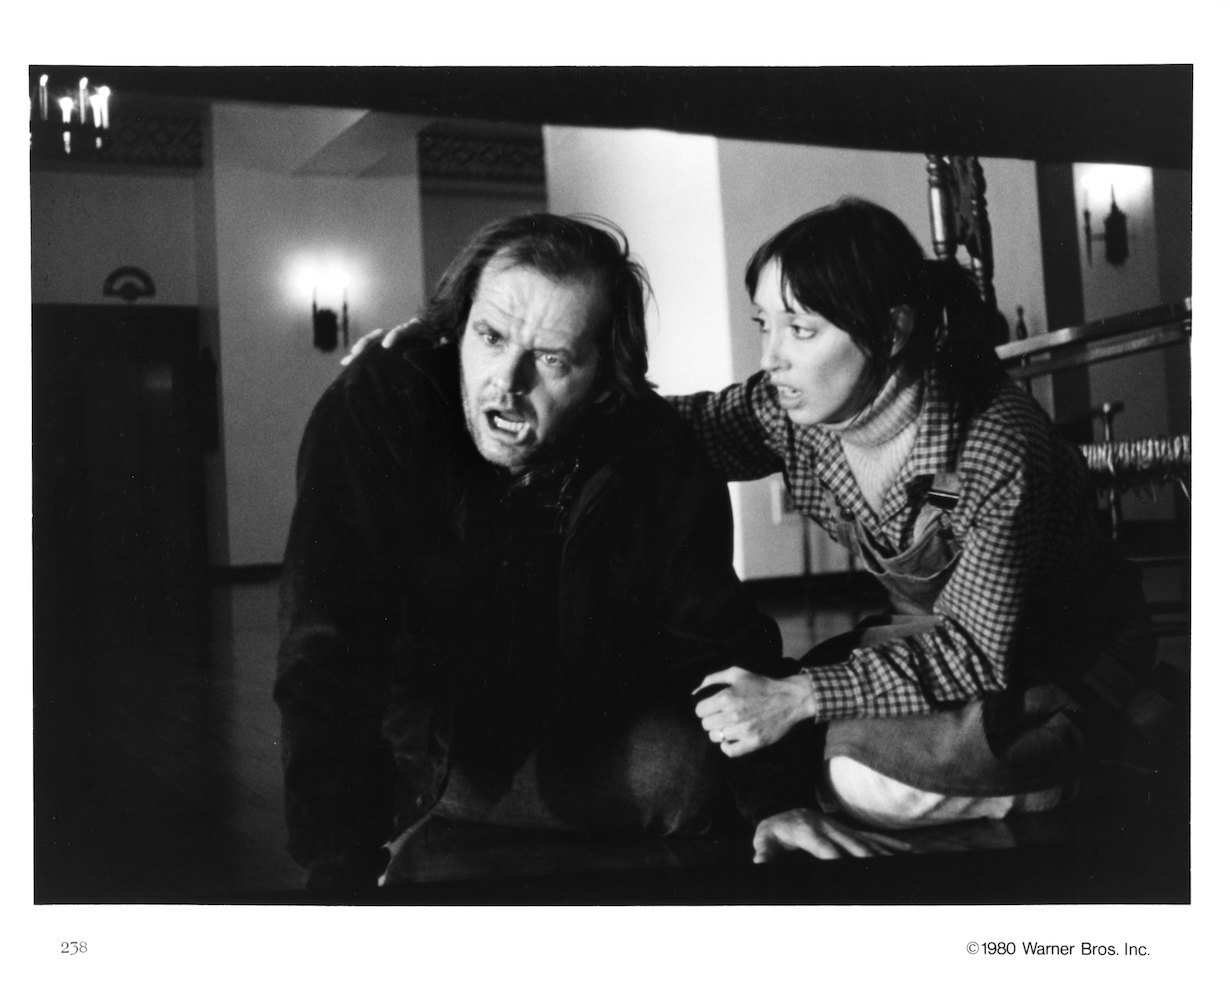 The Shining': Shelley Duvall Said She and Stanley Kubrick Would 'Explode'  at Each Other While Filming